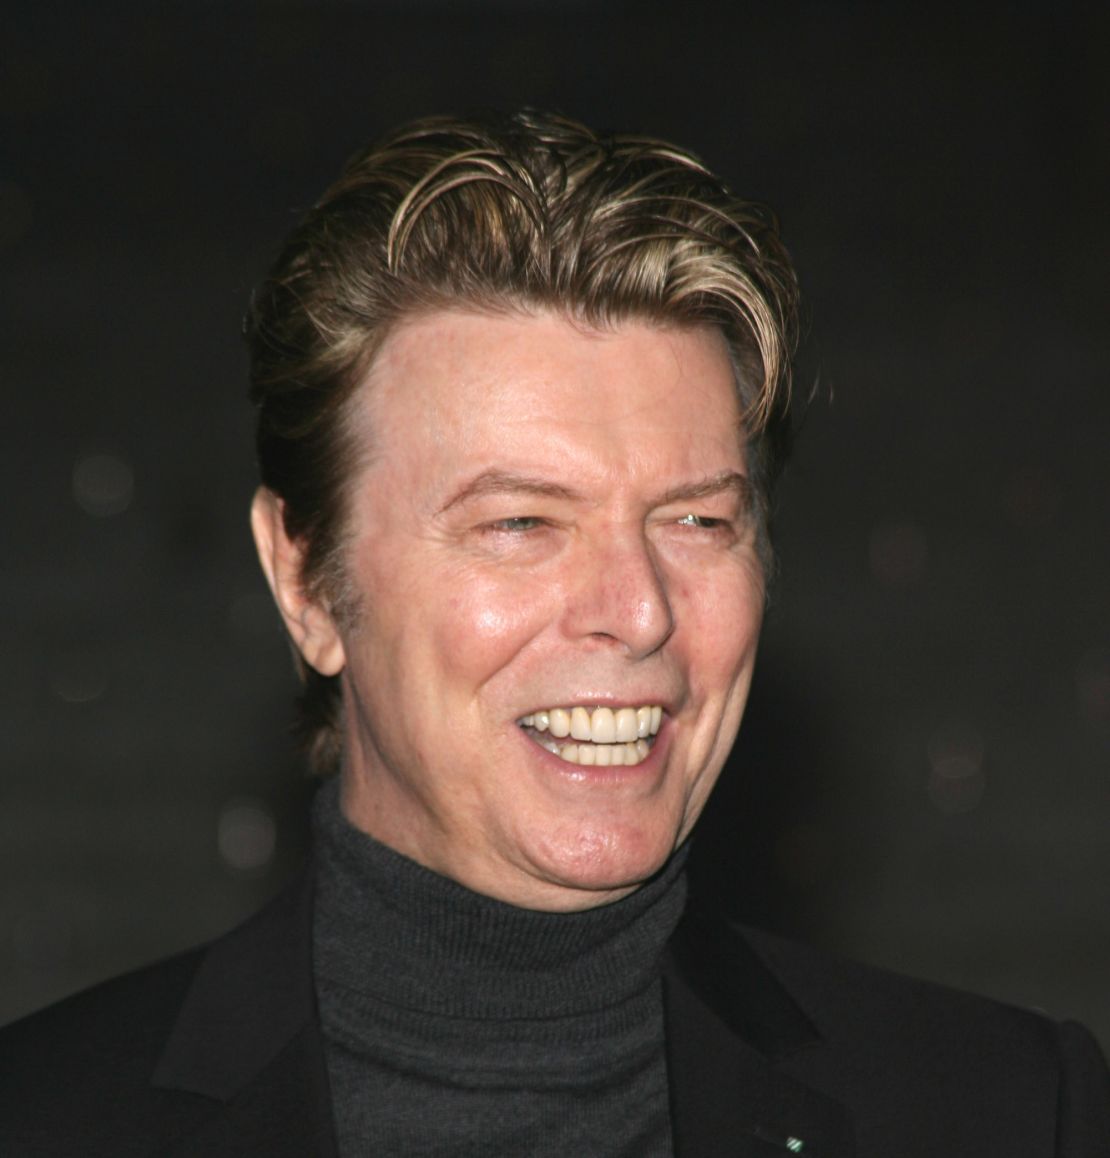 David Bowie said honors were not something he spent his life "working for."